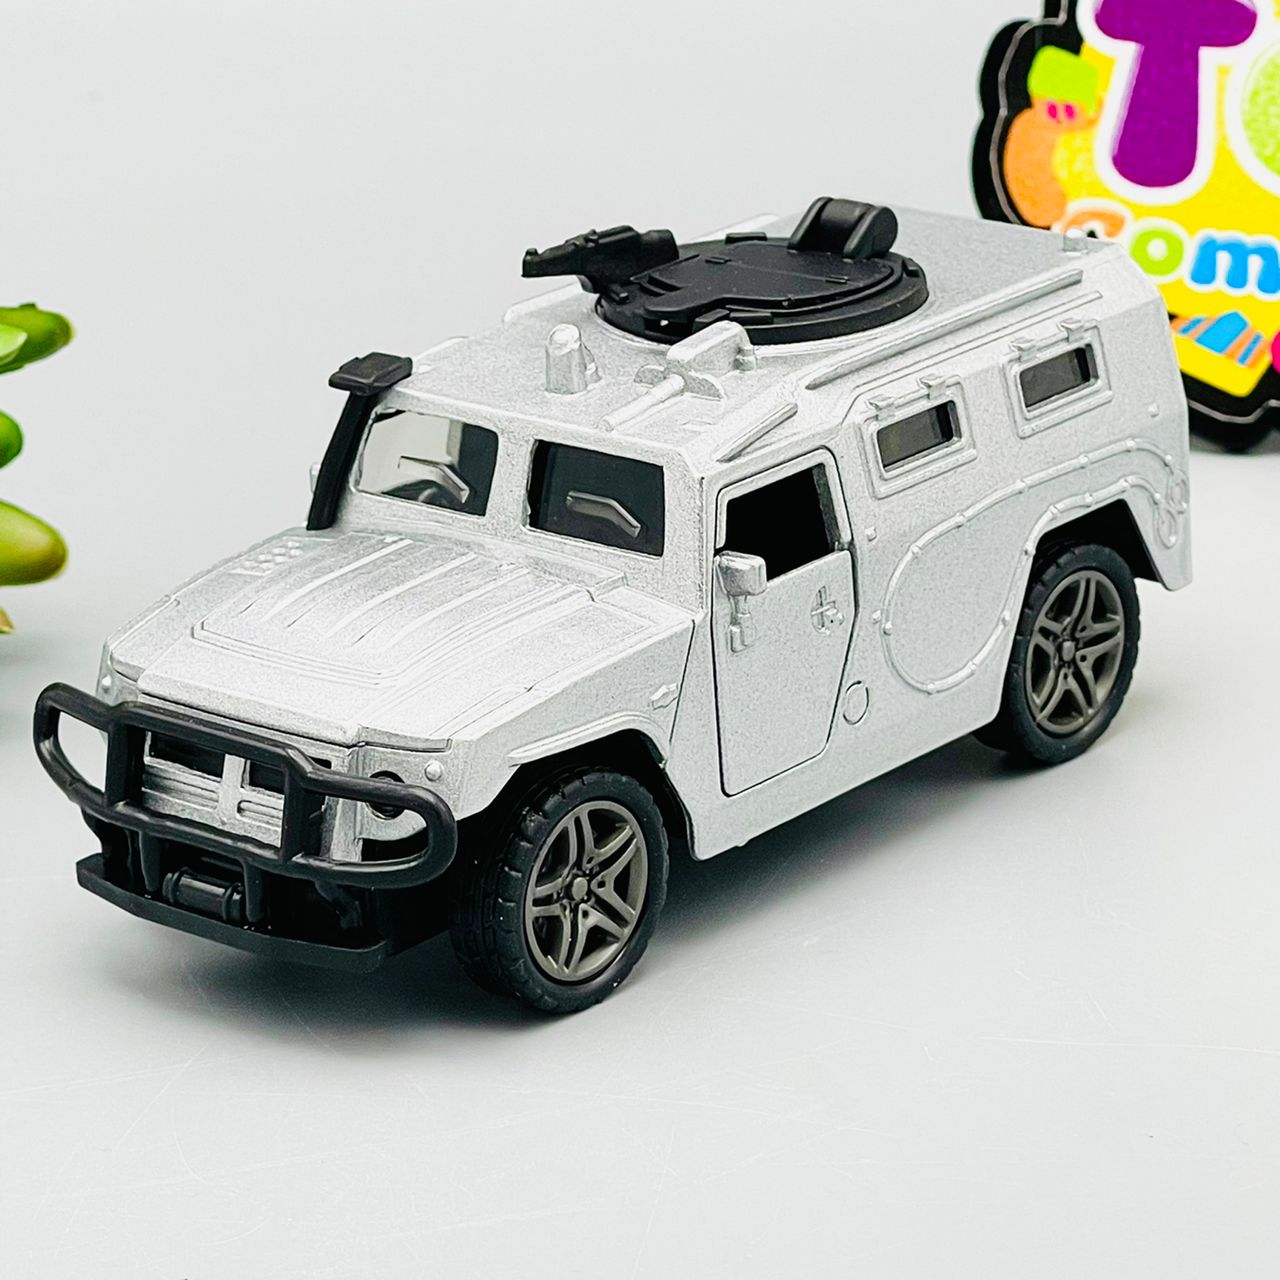 1:36 Diecast Russian Armored Car